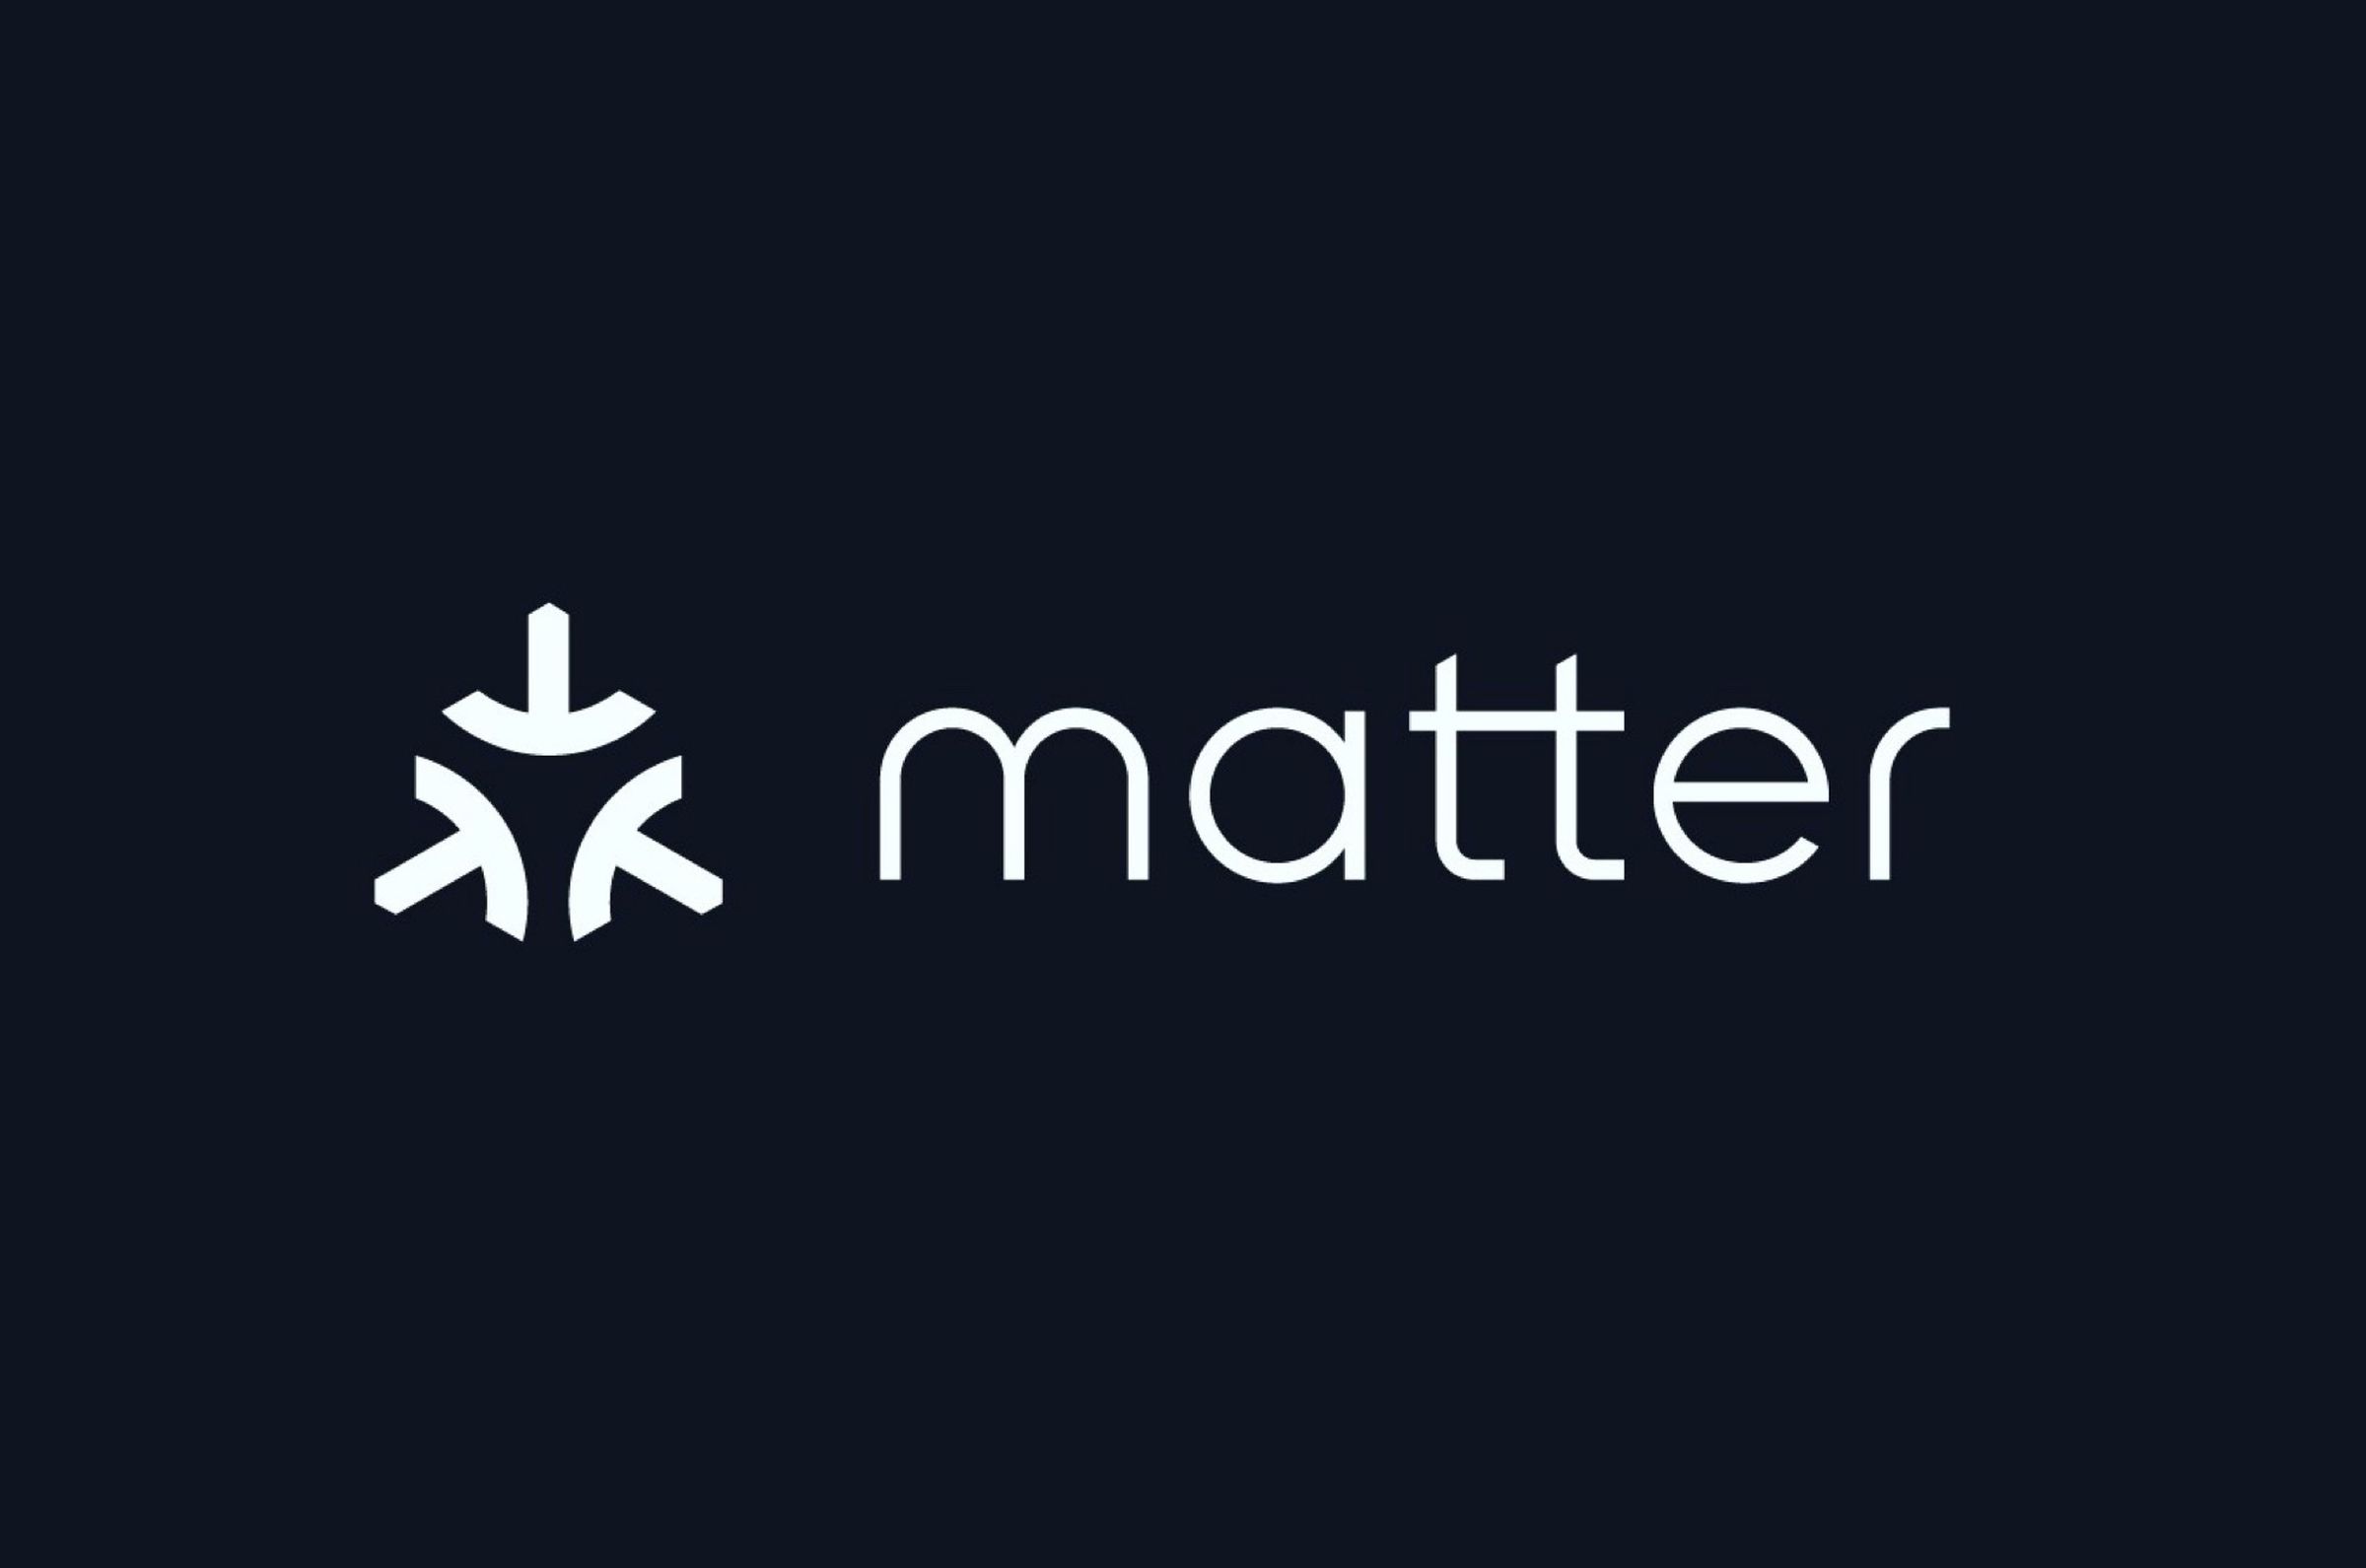 Matter logo and text displayed in white on a black background.